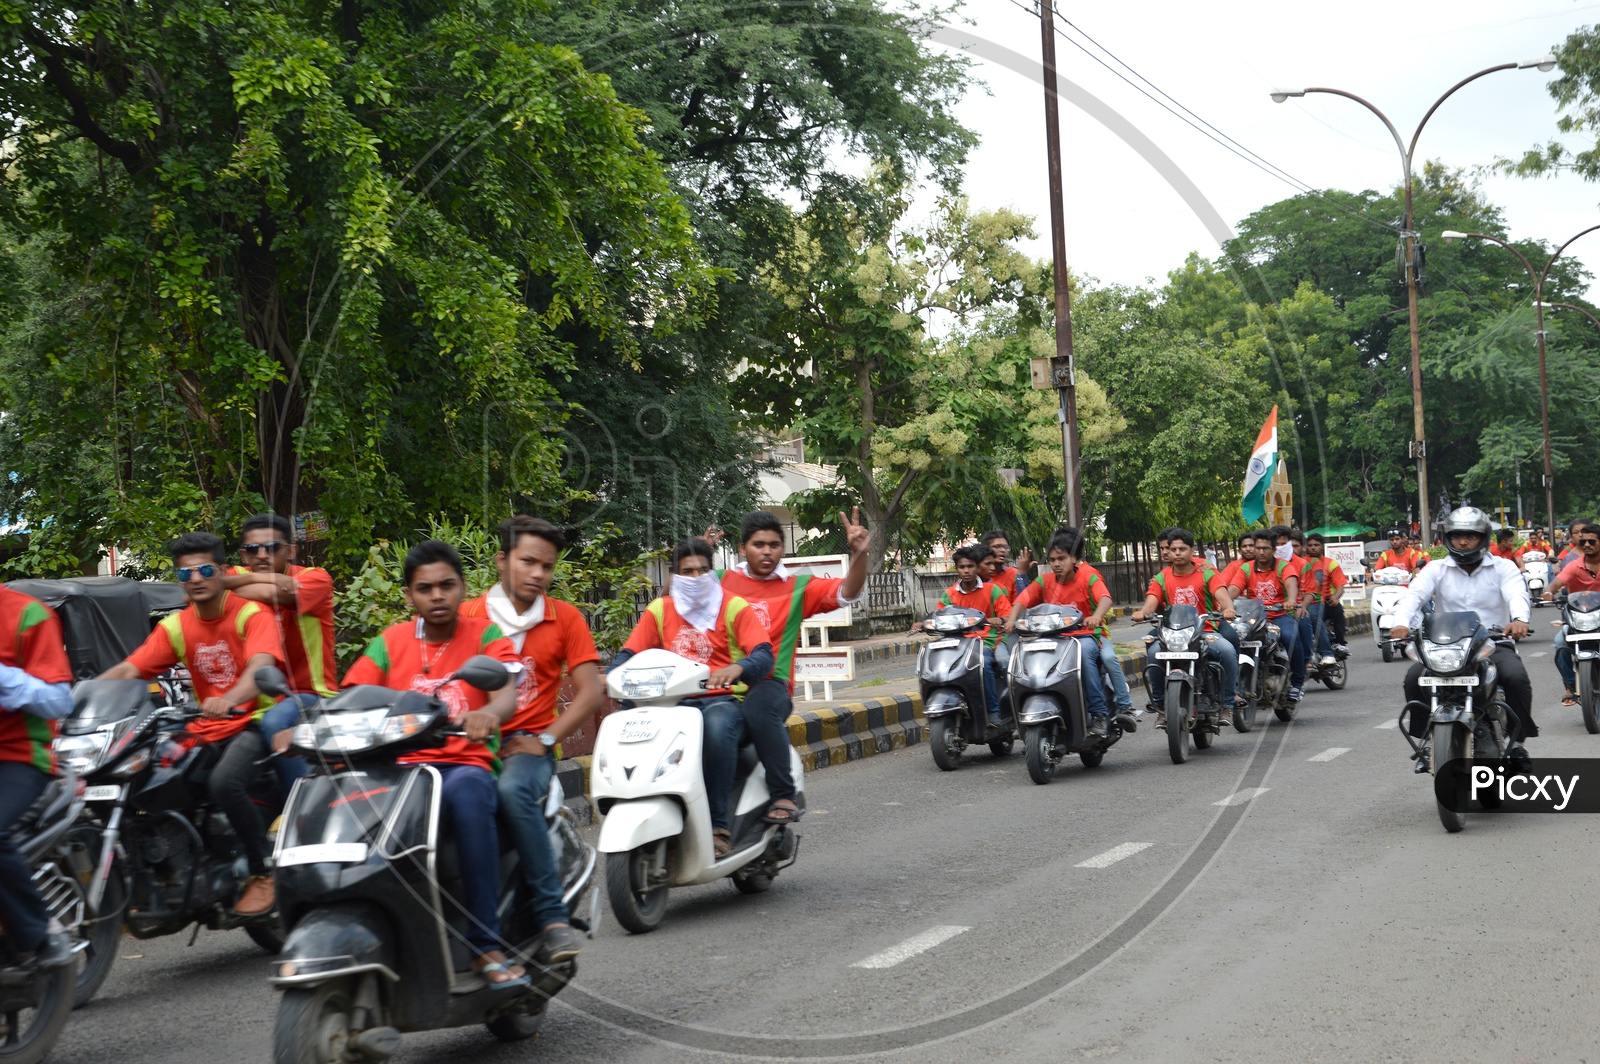 Indian Young People Celebrating Independence Day As a Bike Rally Waving The Indian National Flag